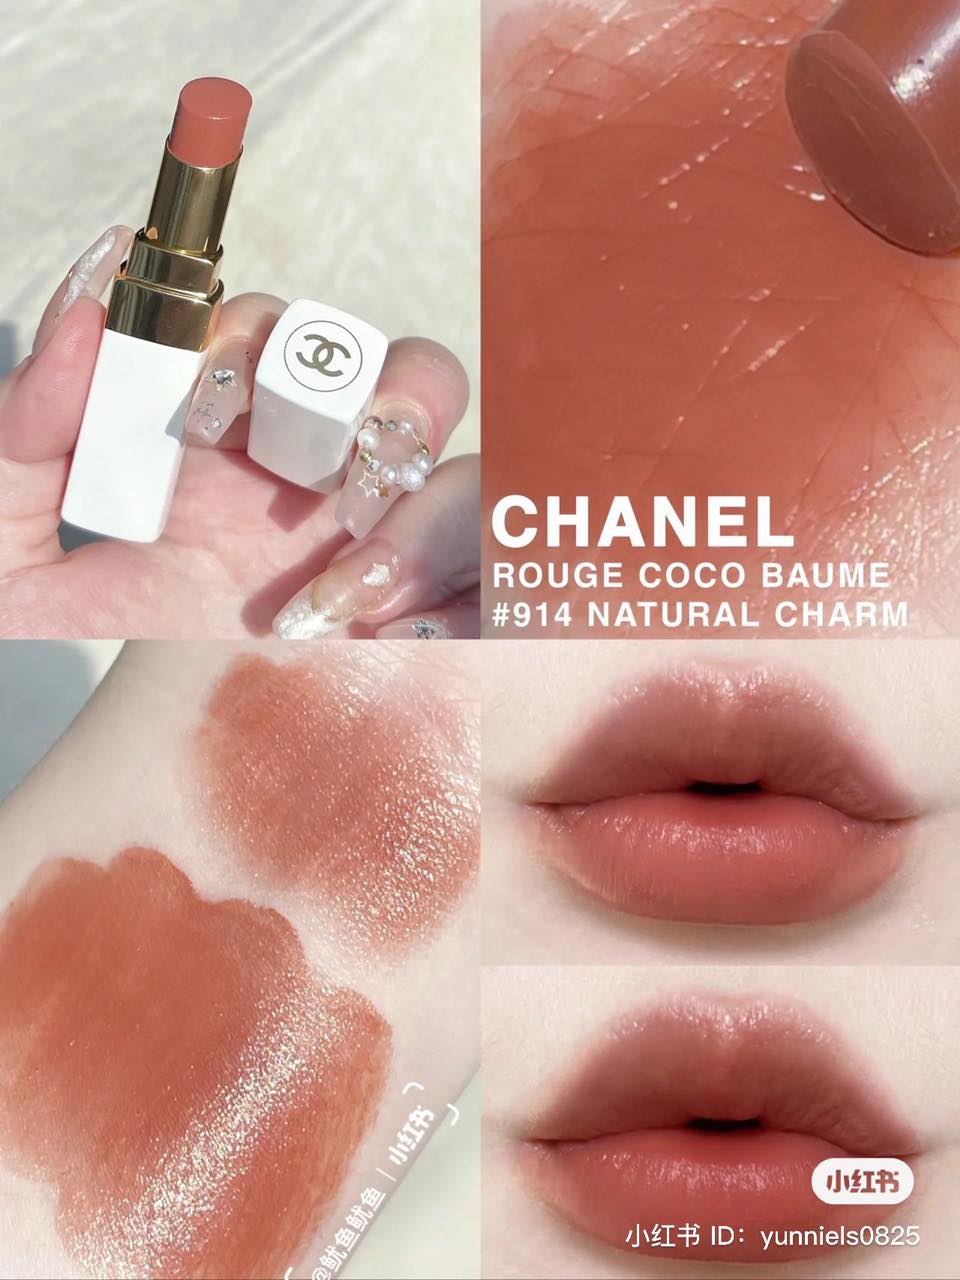 Top 44+ imagen chanel coco baume natural charm